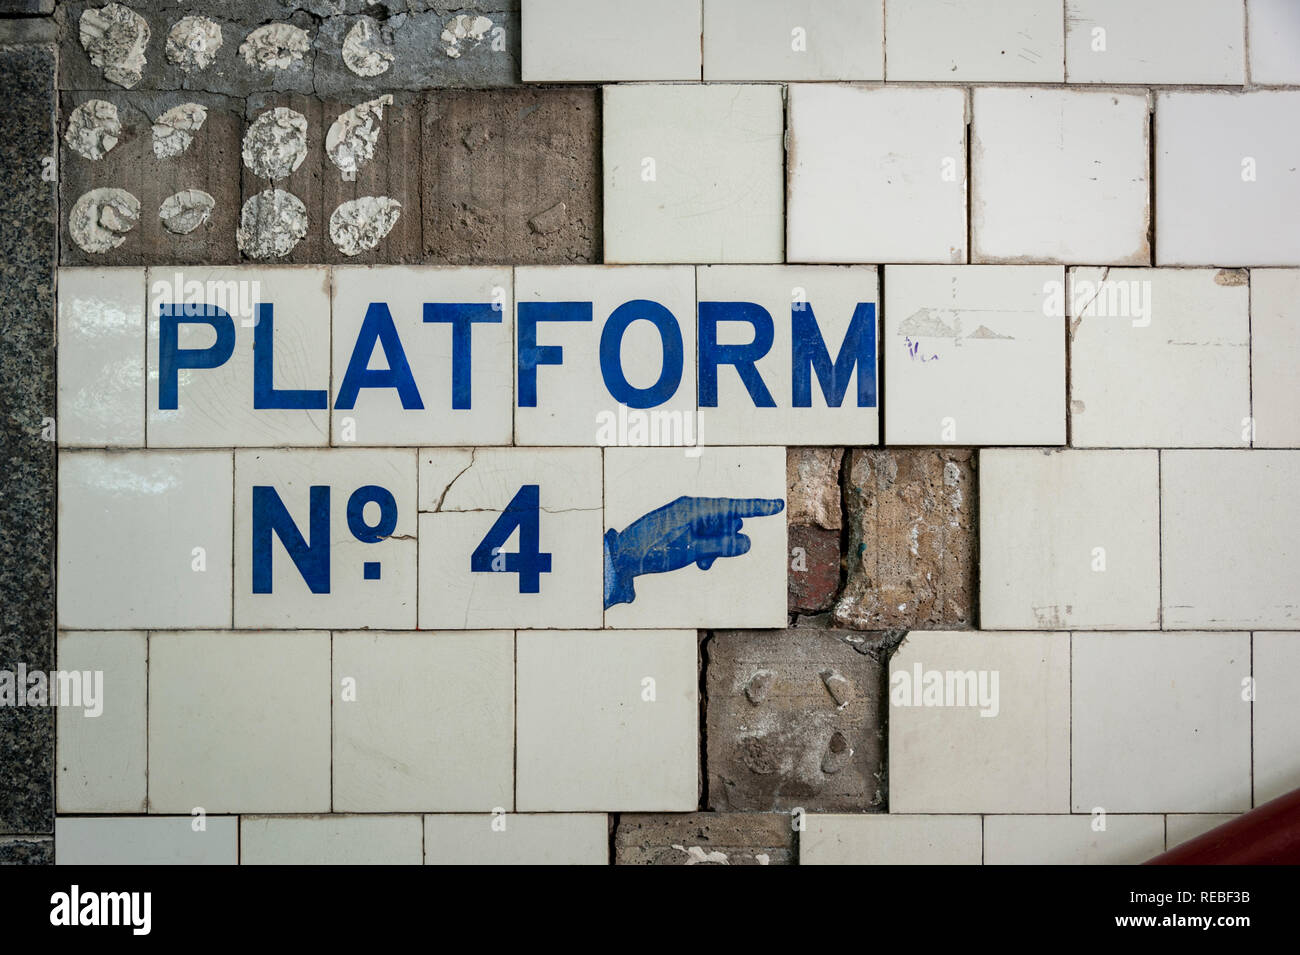 Platform No. 4 with a pointing finger icon and a wall with broken and missing tiles, blue on white Stock Photo